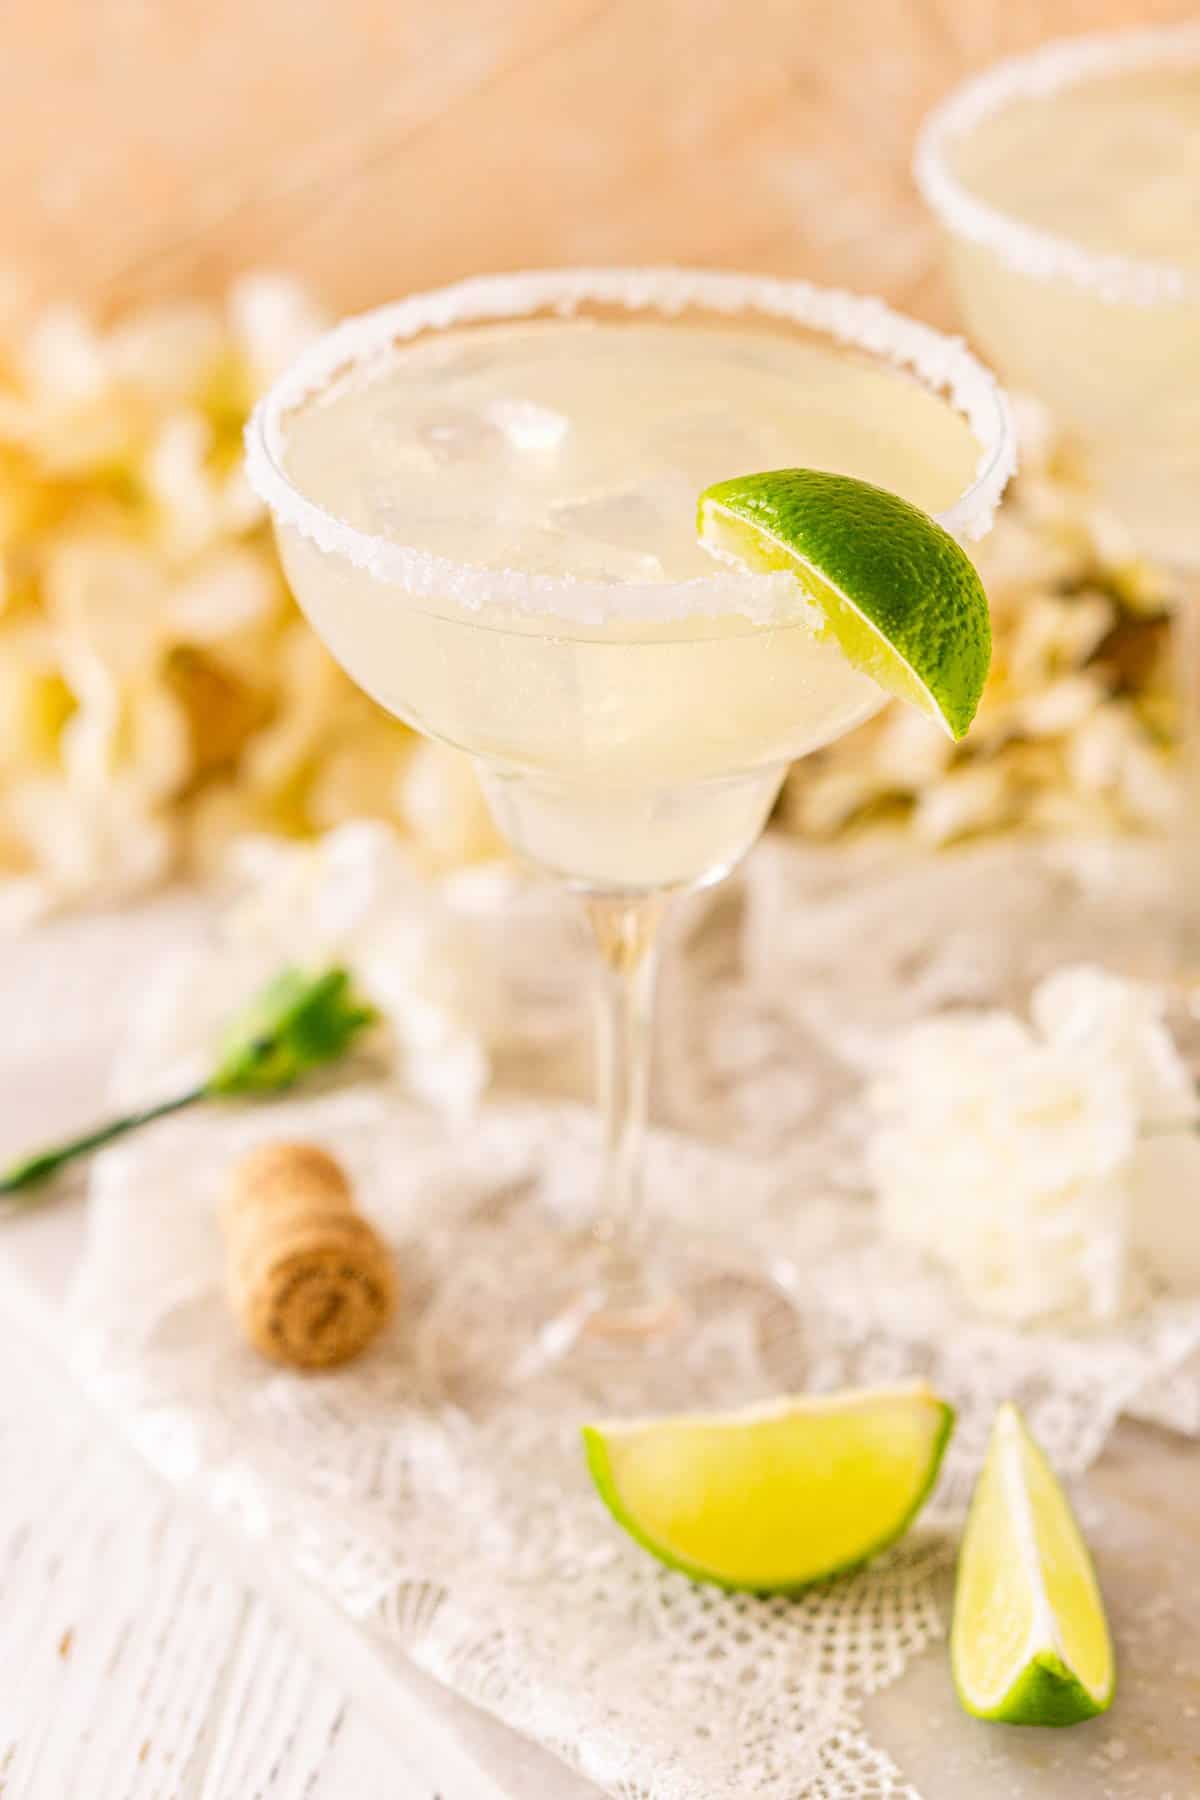 A close-up view of a prosecco margarita on a piece of white lace with lime slices in front to the right.